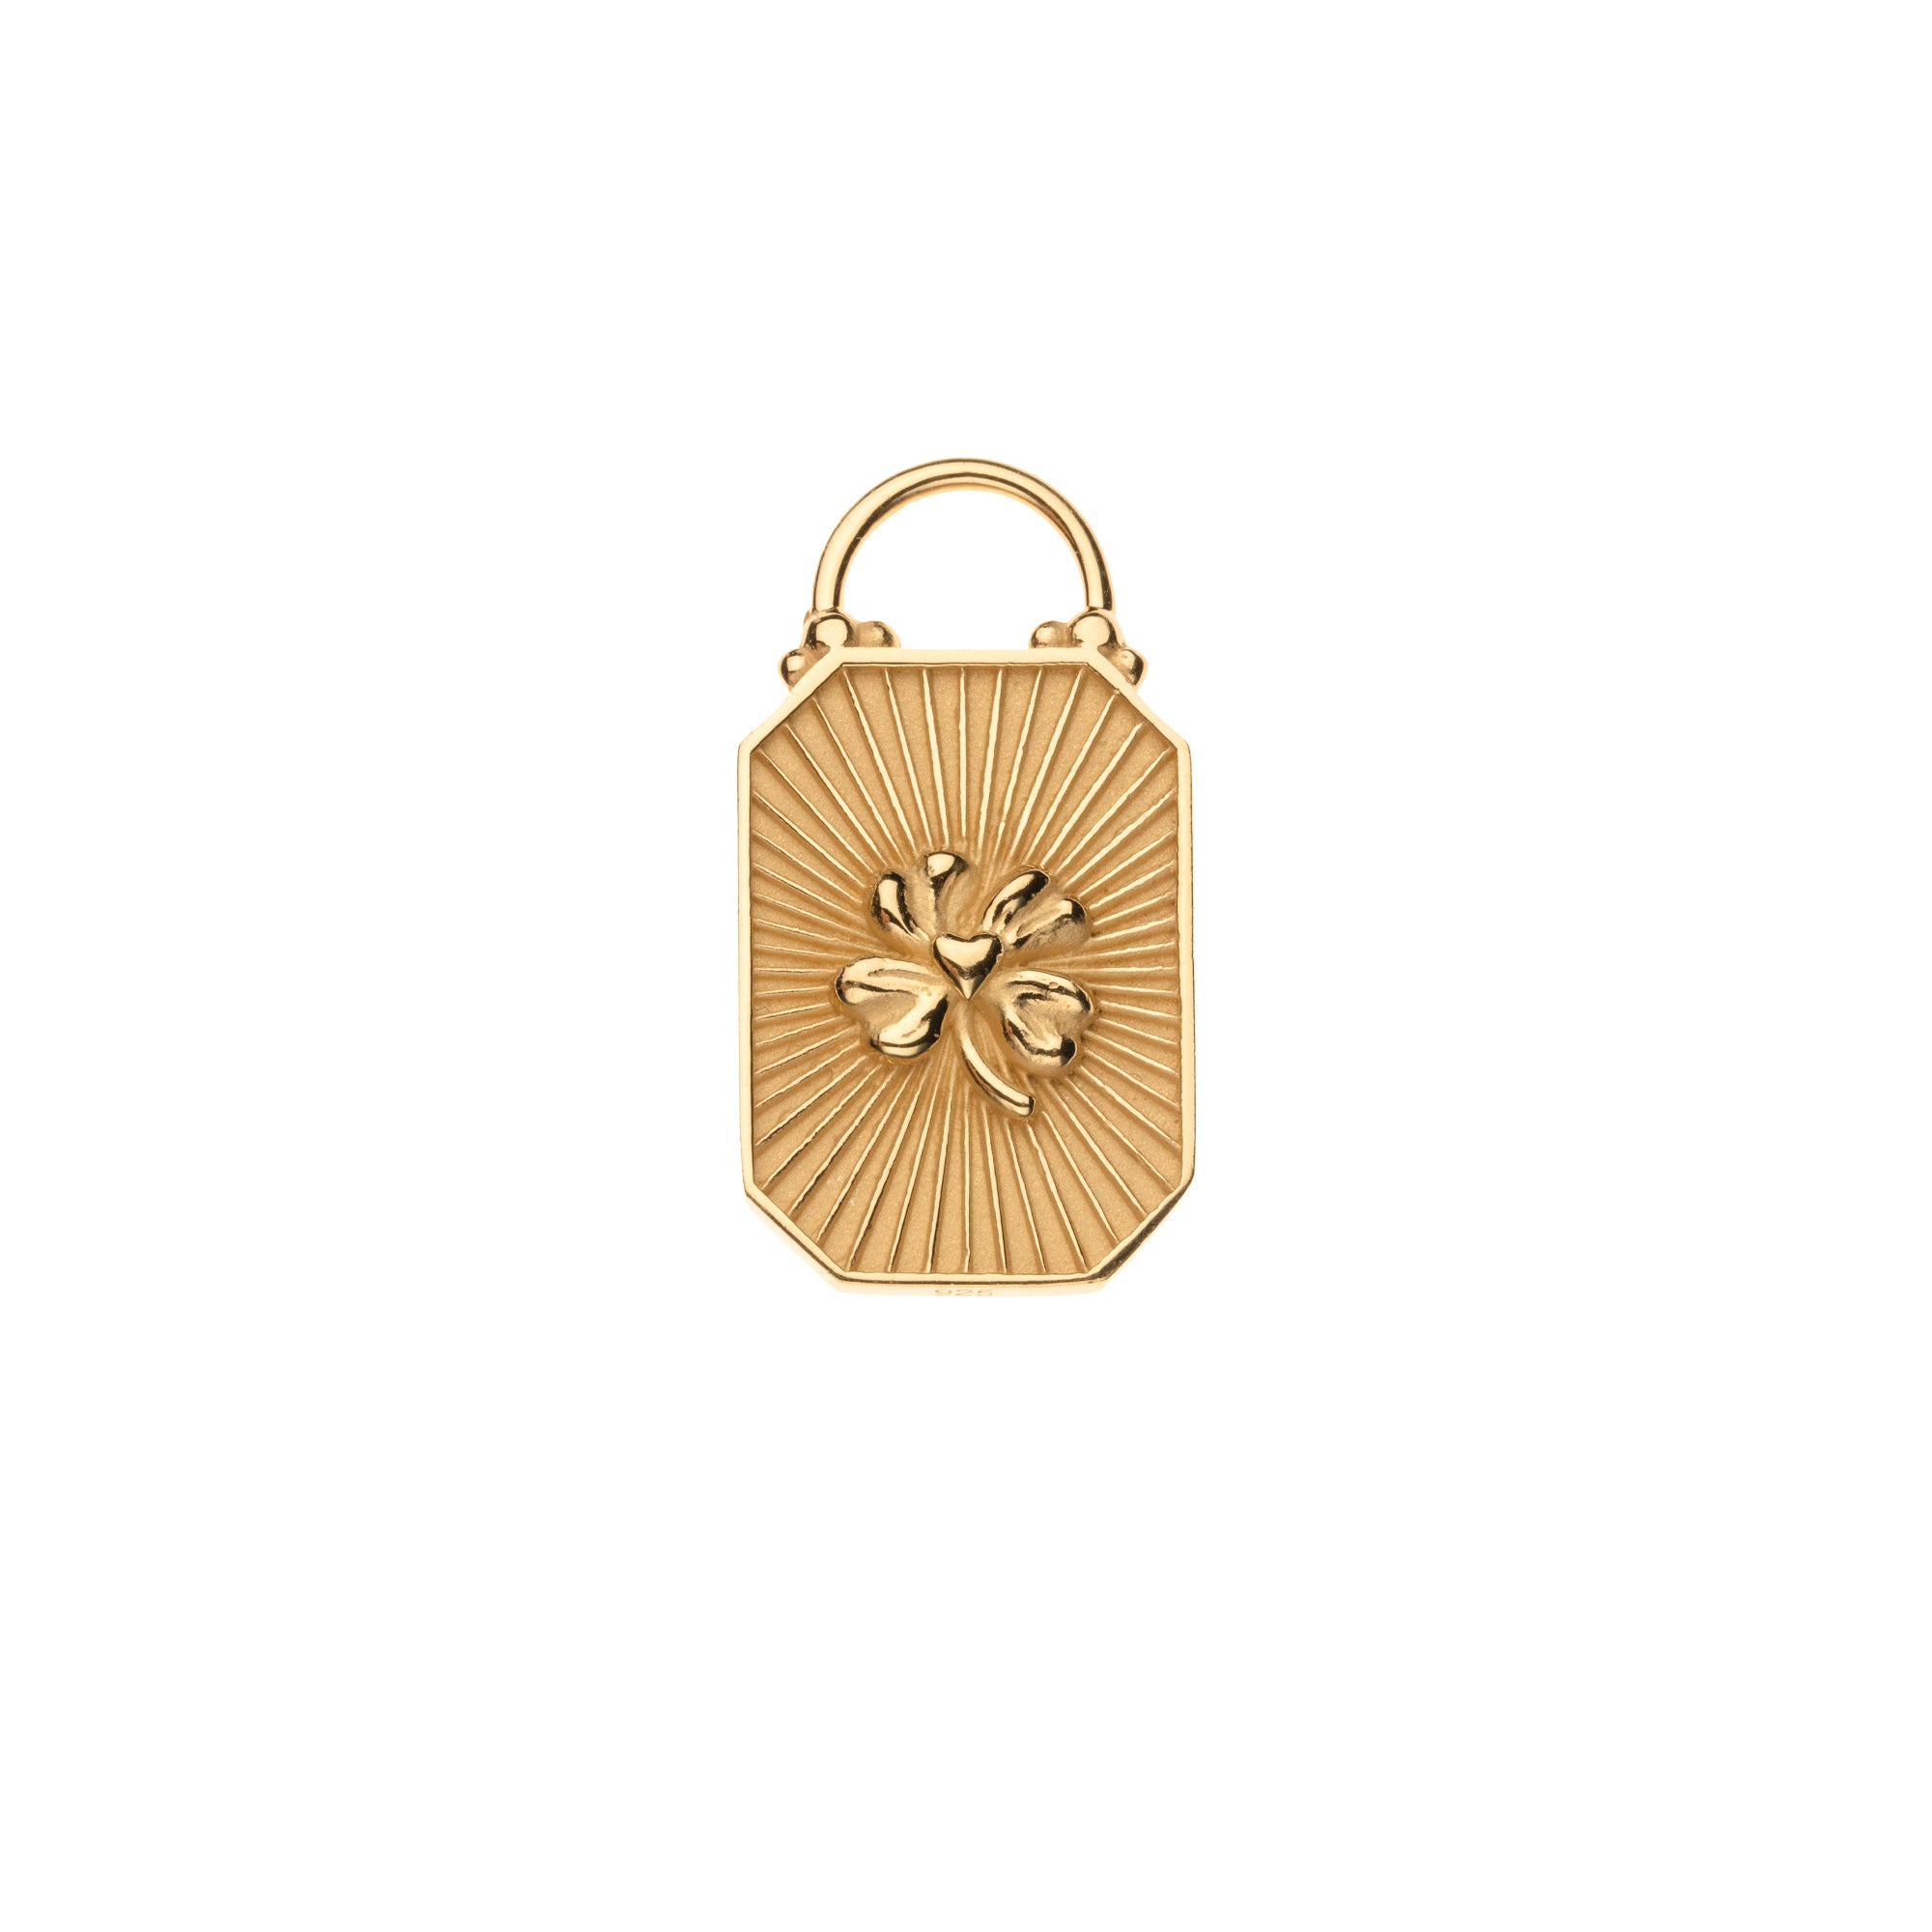 Fortune cookie keychain. I need it. : r/Louisvuitton